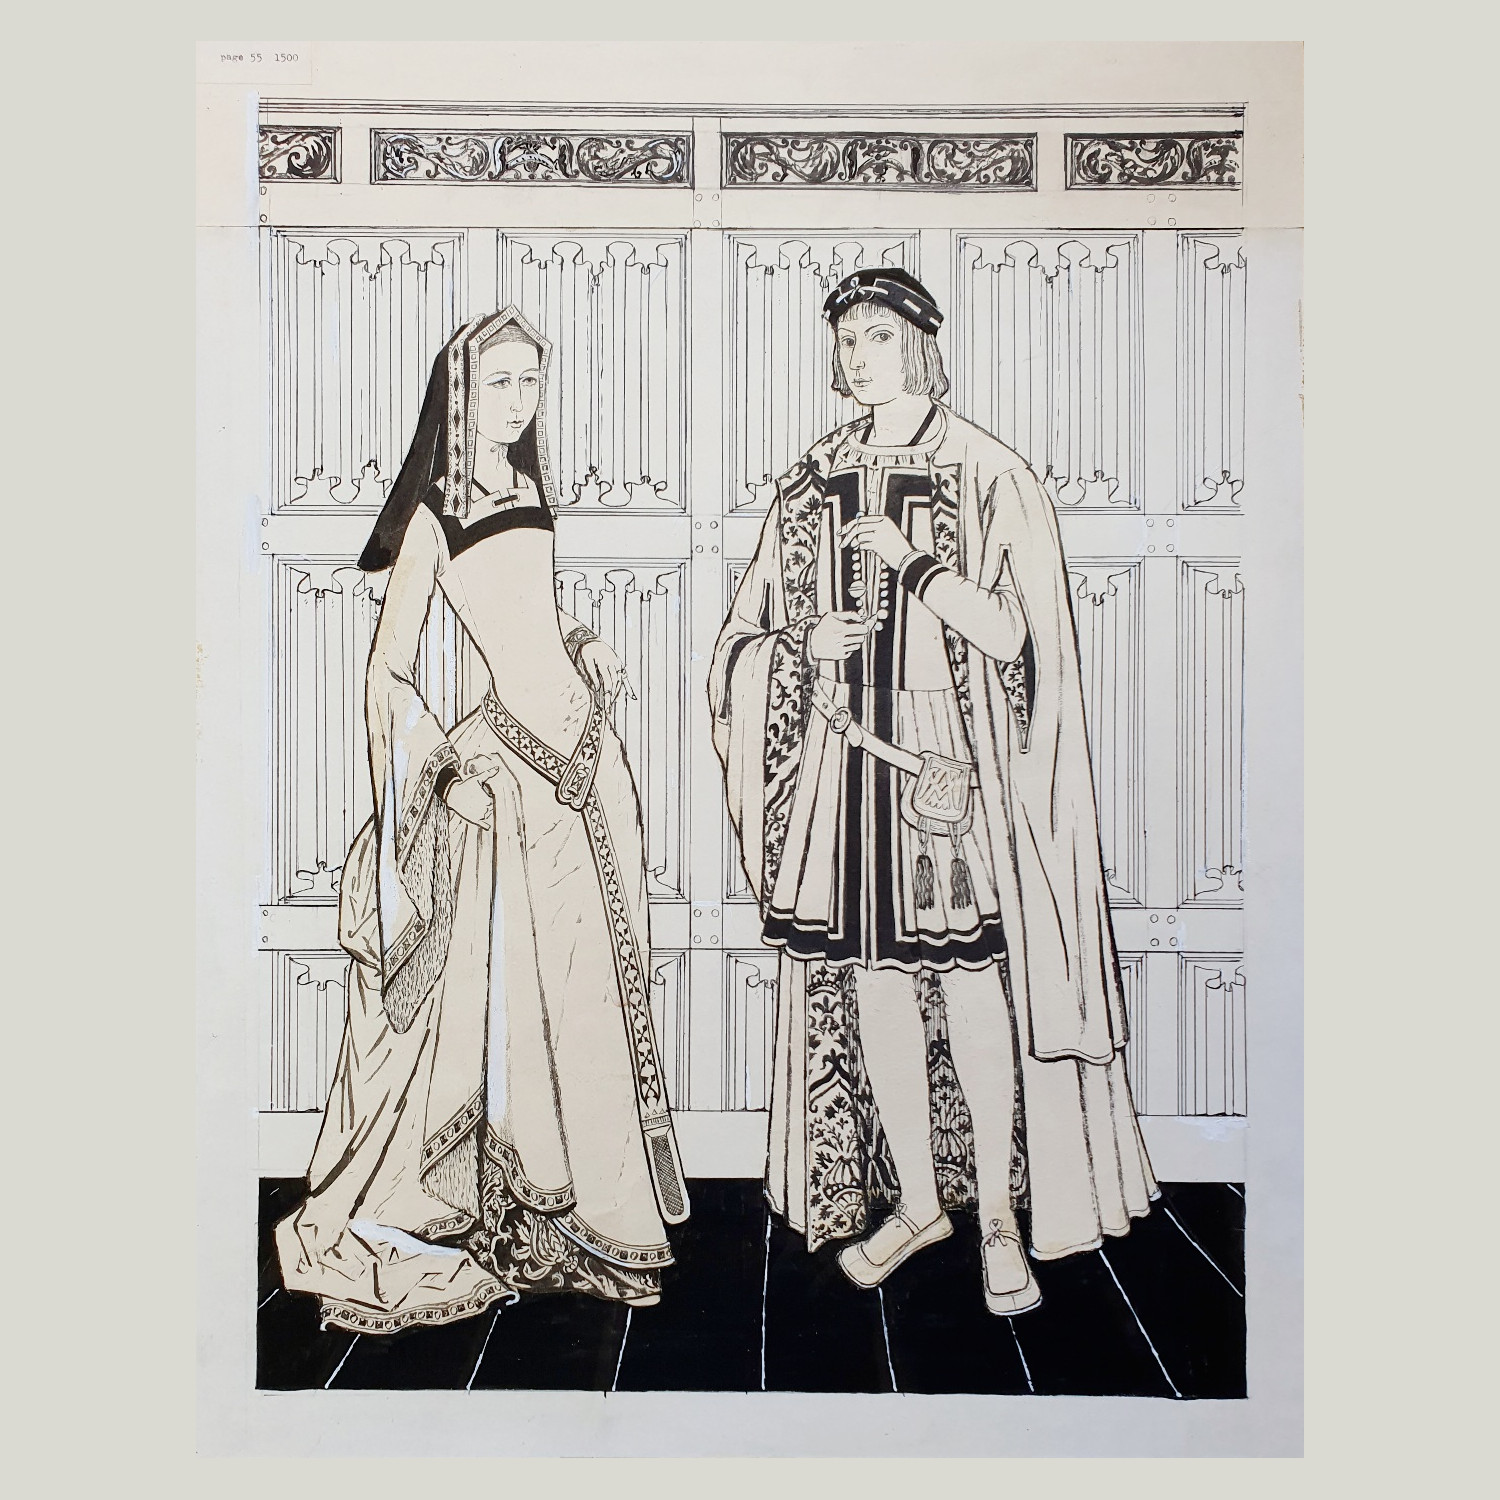 Original drawing by Margot Hamilton Hill depicting fashions from the reign of Henry VII, 1500